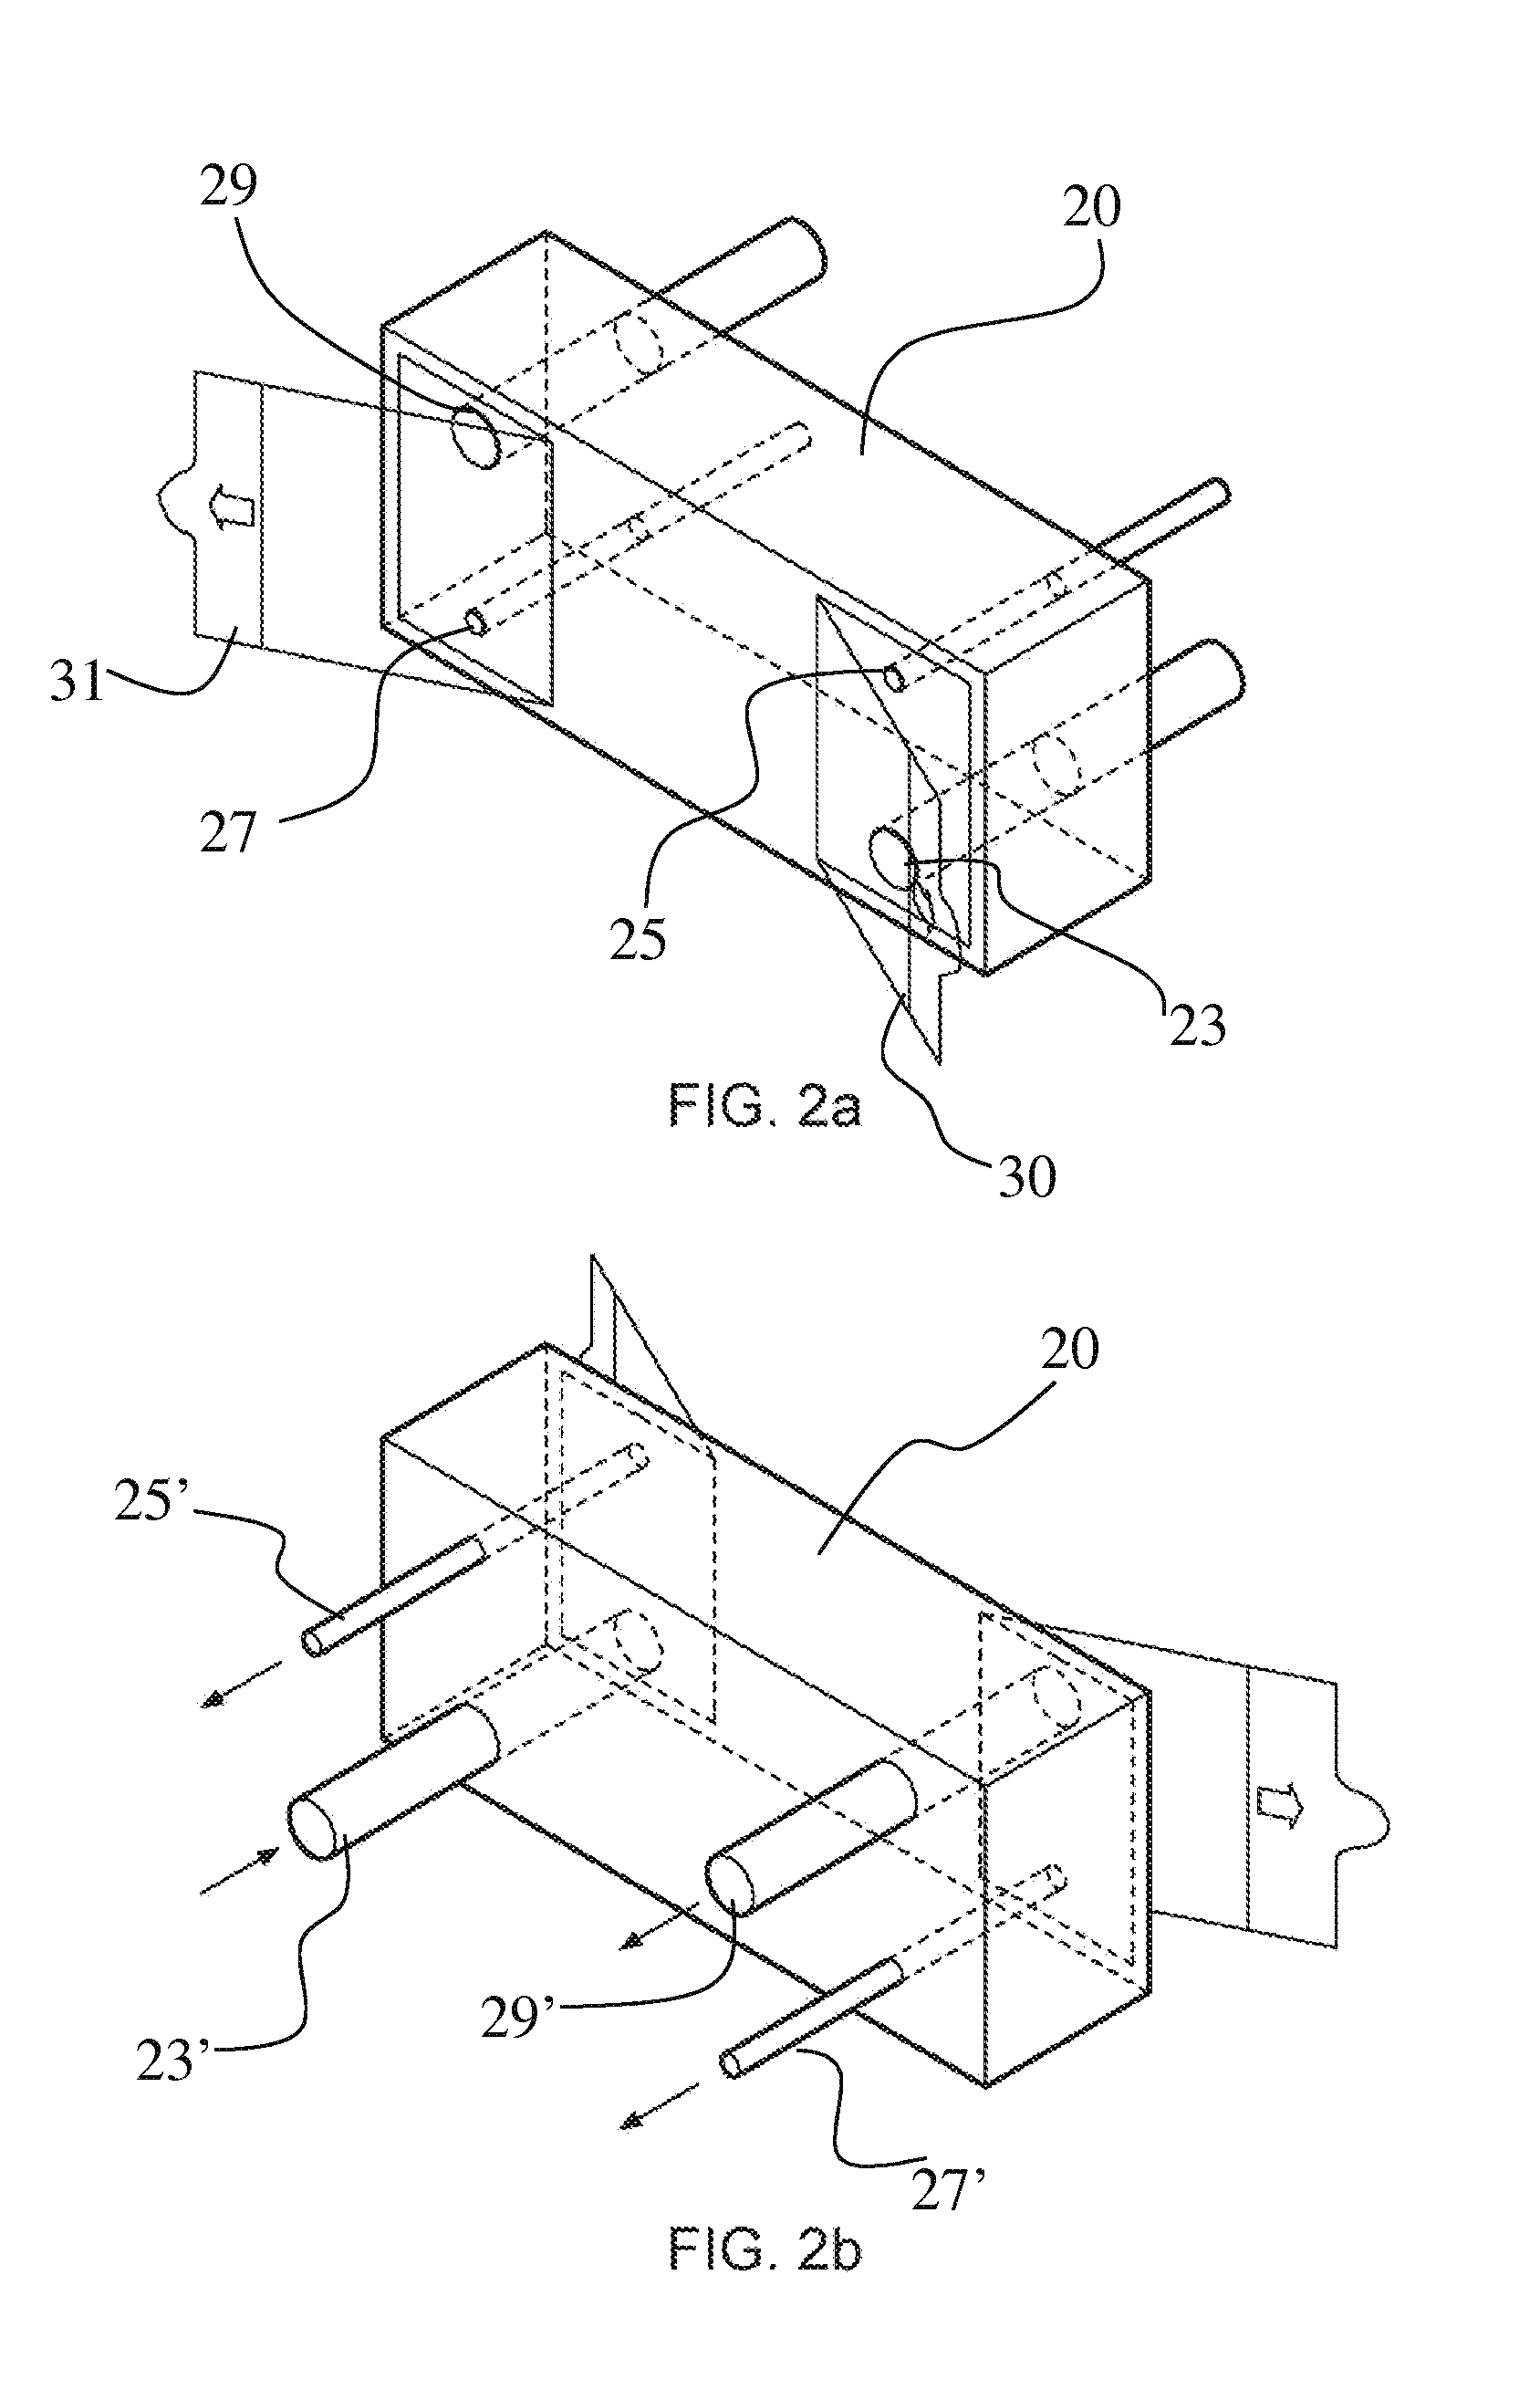 Aseptic connection of separation or reaction systems